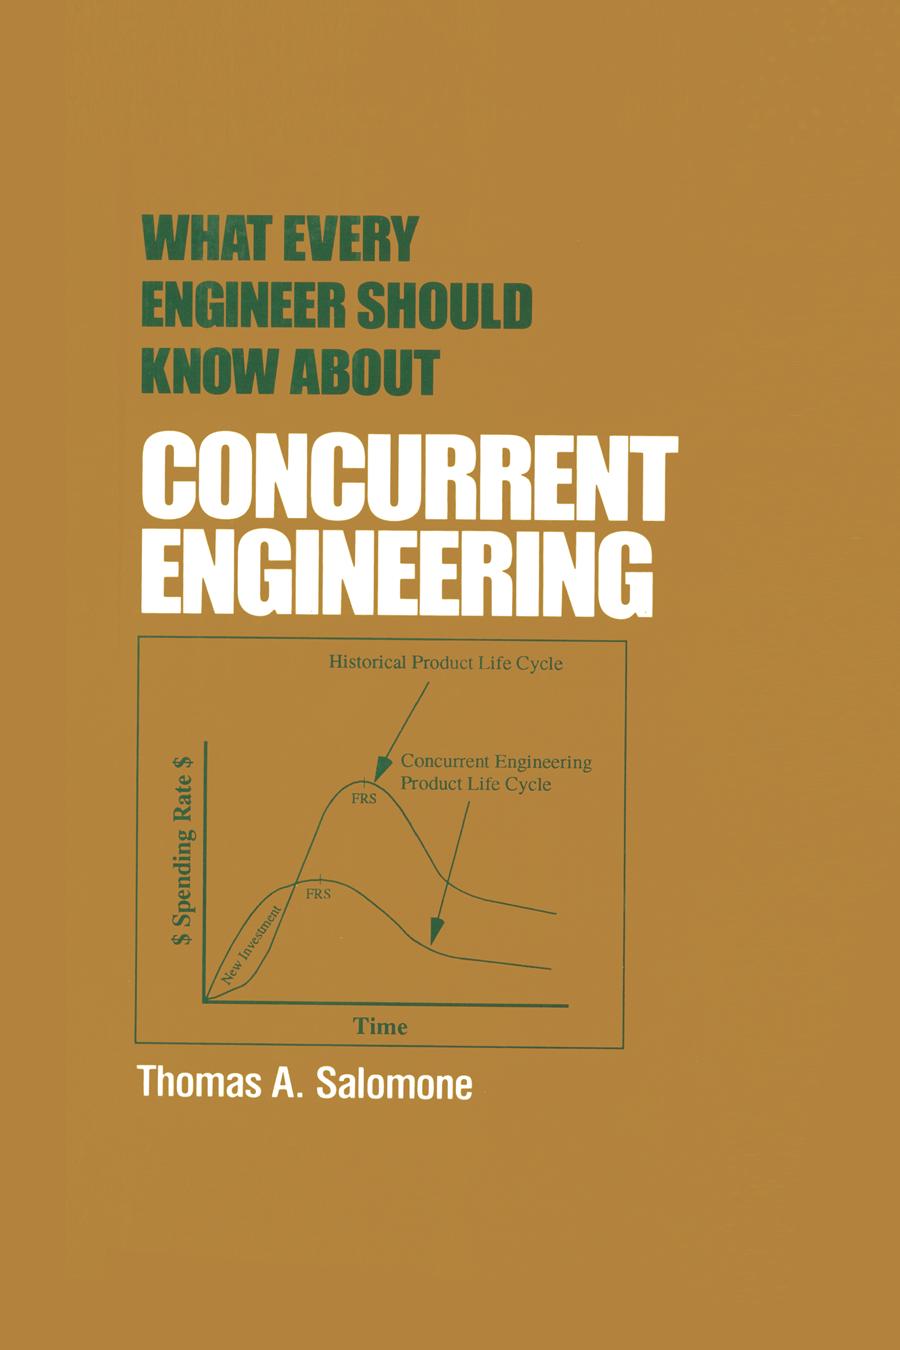 What Every Engineer Should Know about Concurrent Engineering